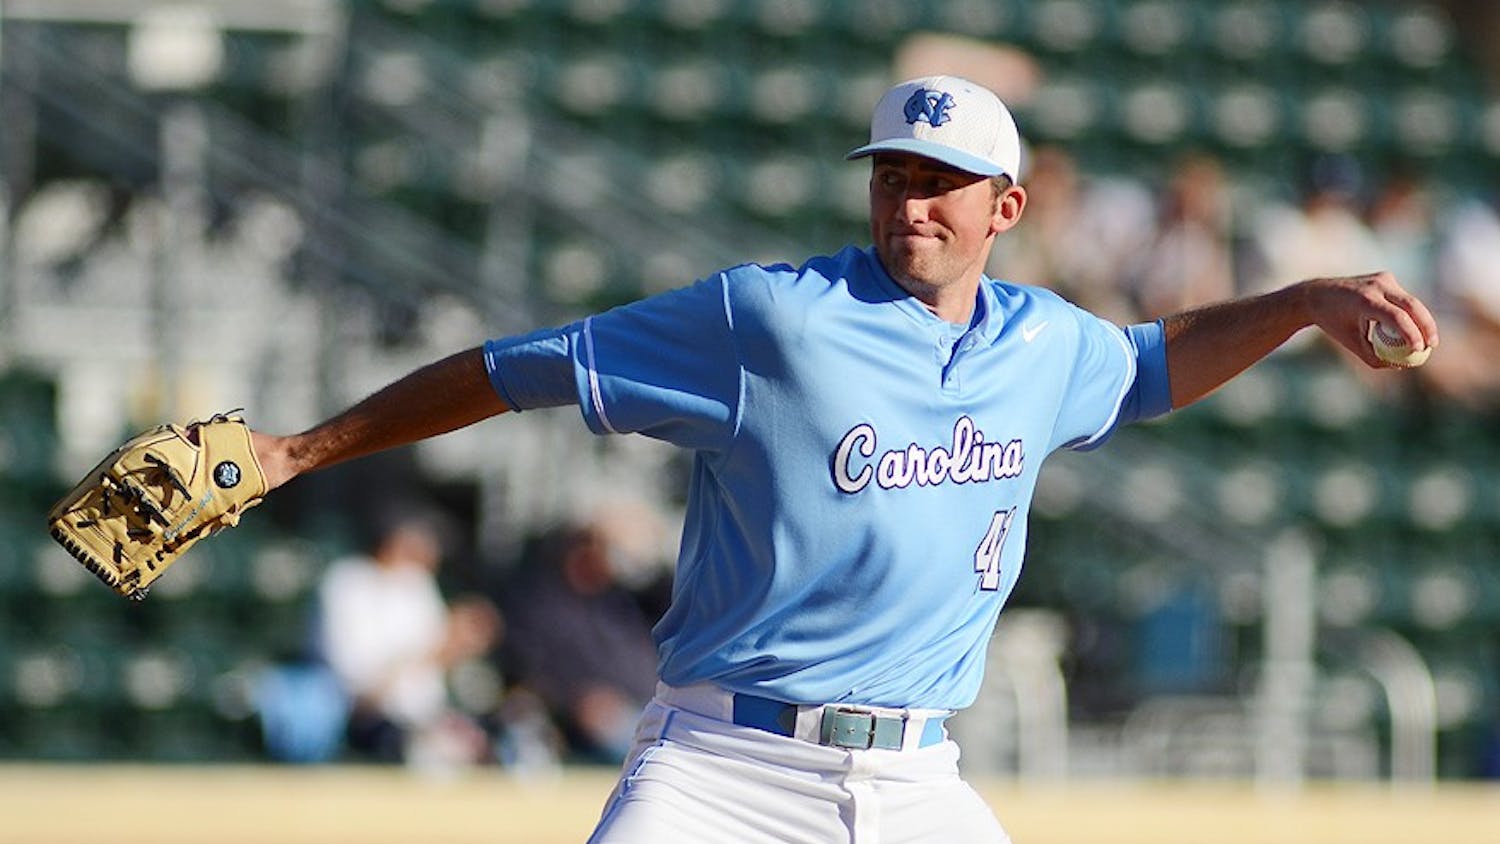 	Kent Emanuel pitched eight innings, allowing zero runs, in UNC’s first game against Boston College.